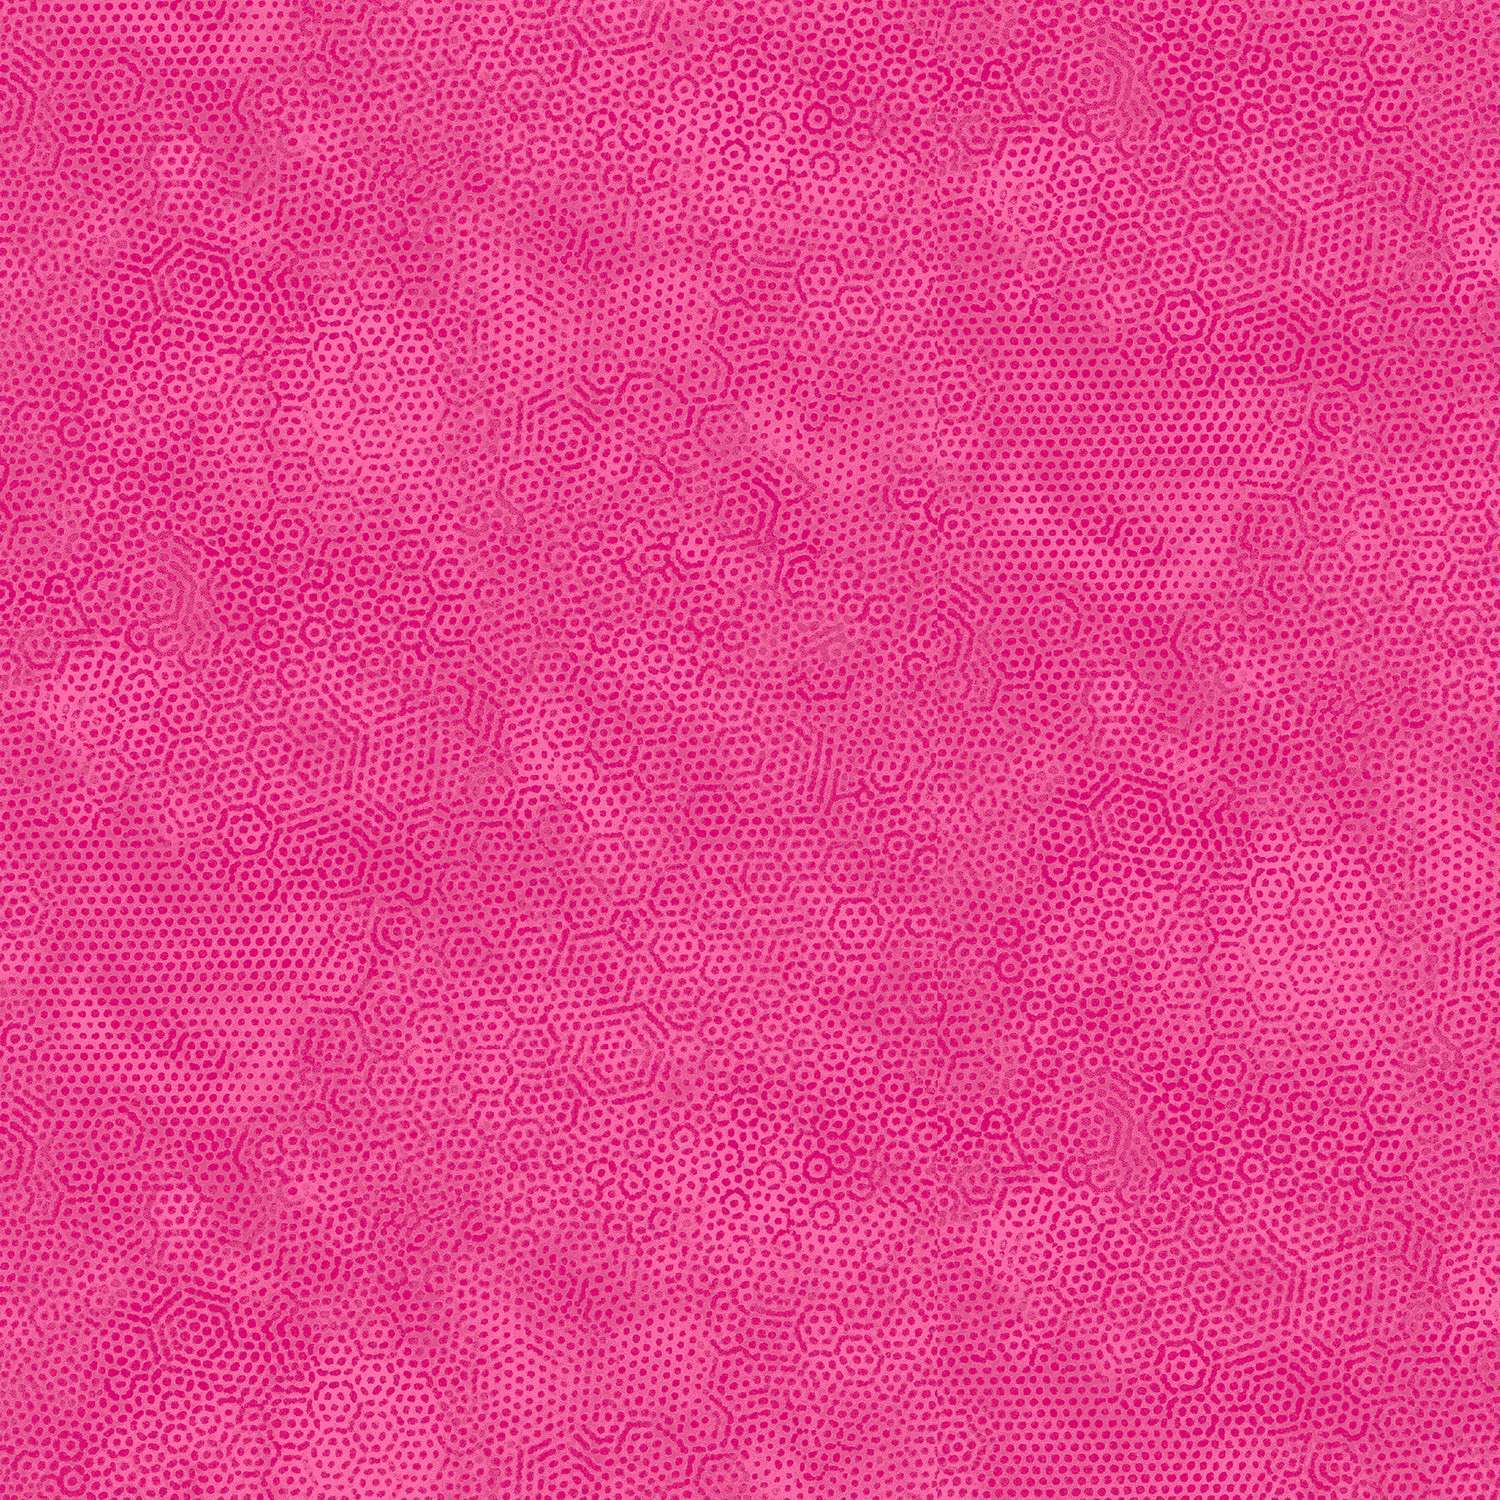 Makower Patchwork Fabric Dimples Scorching Pink 1867 E24